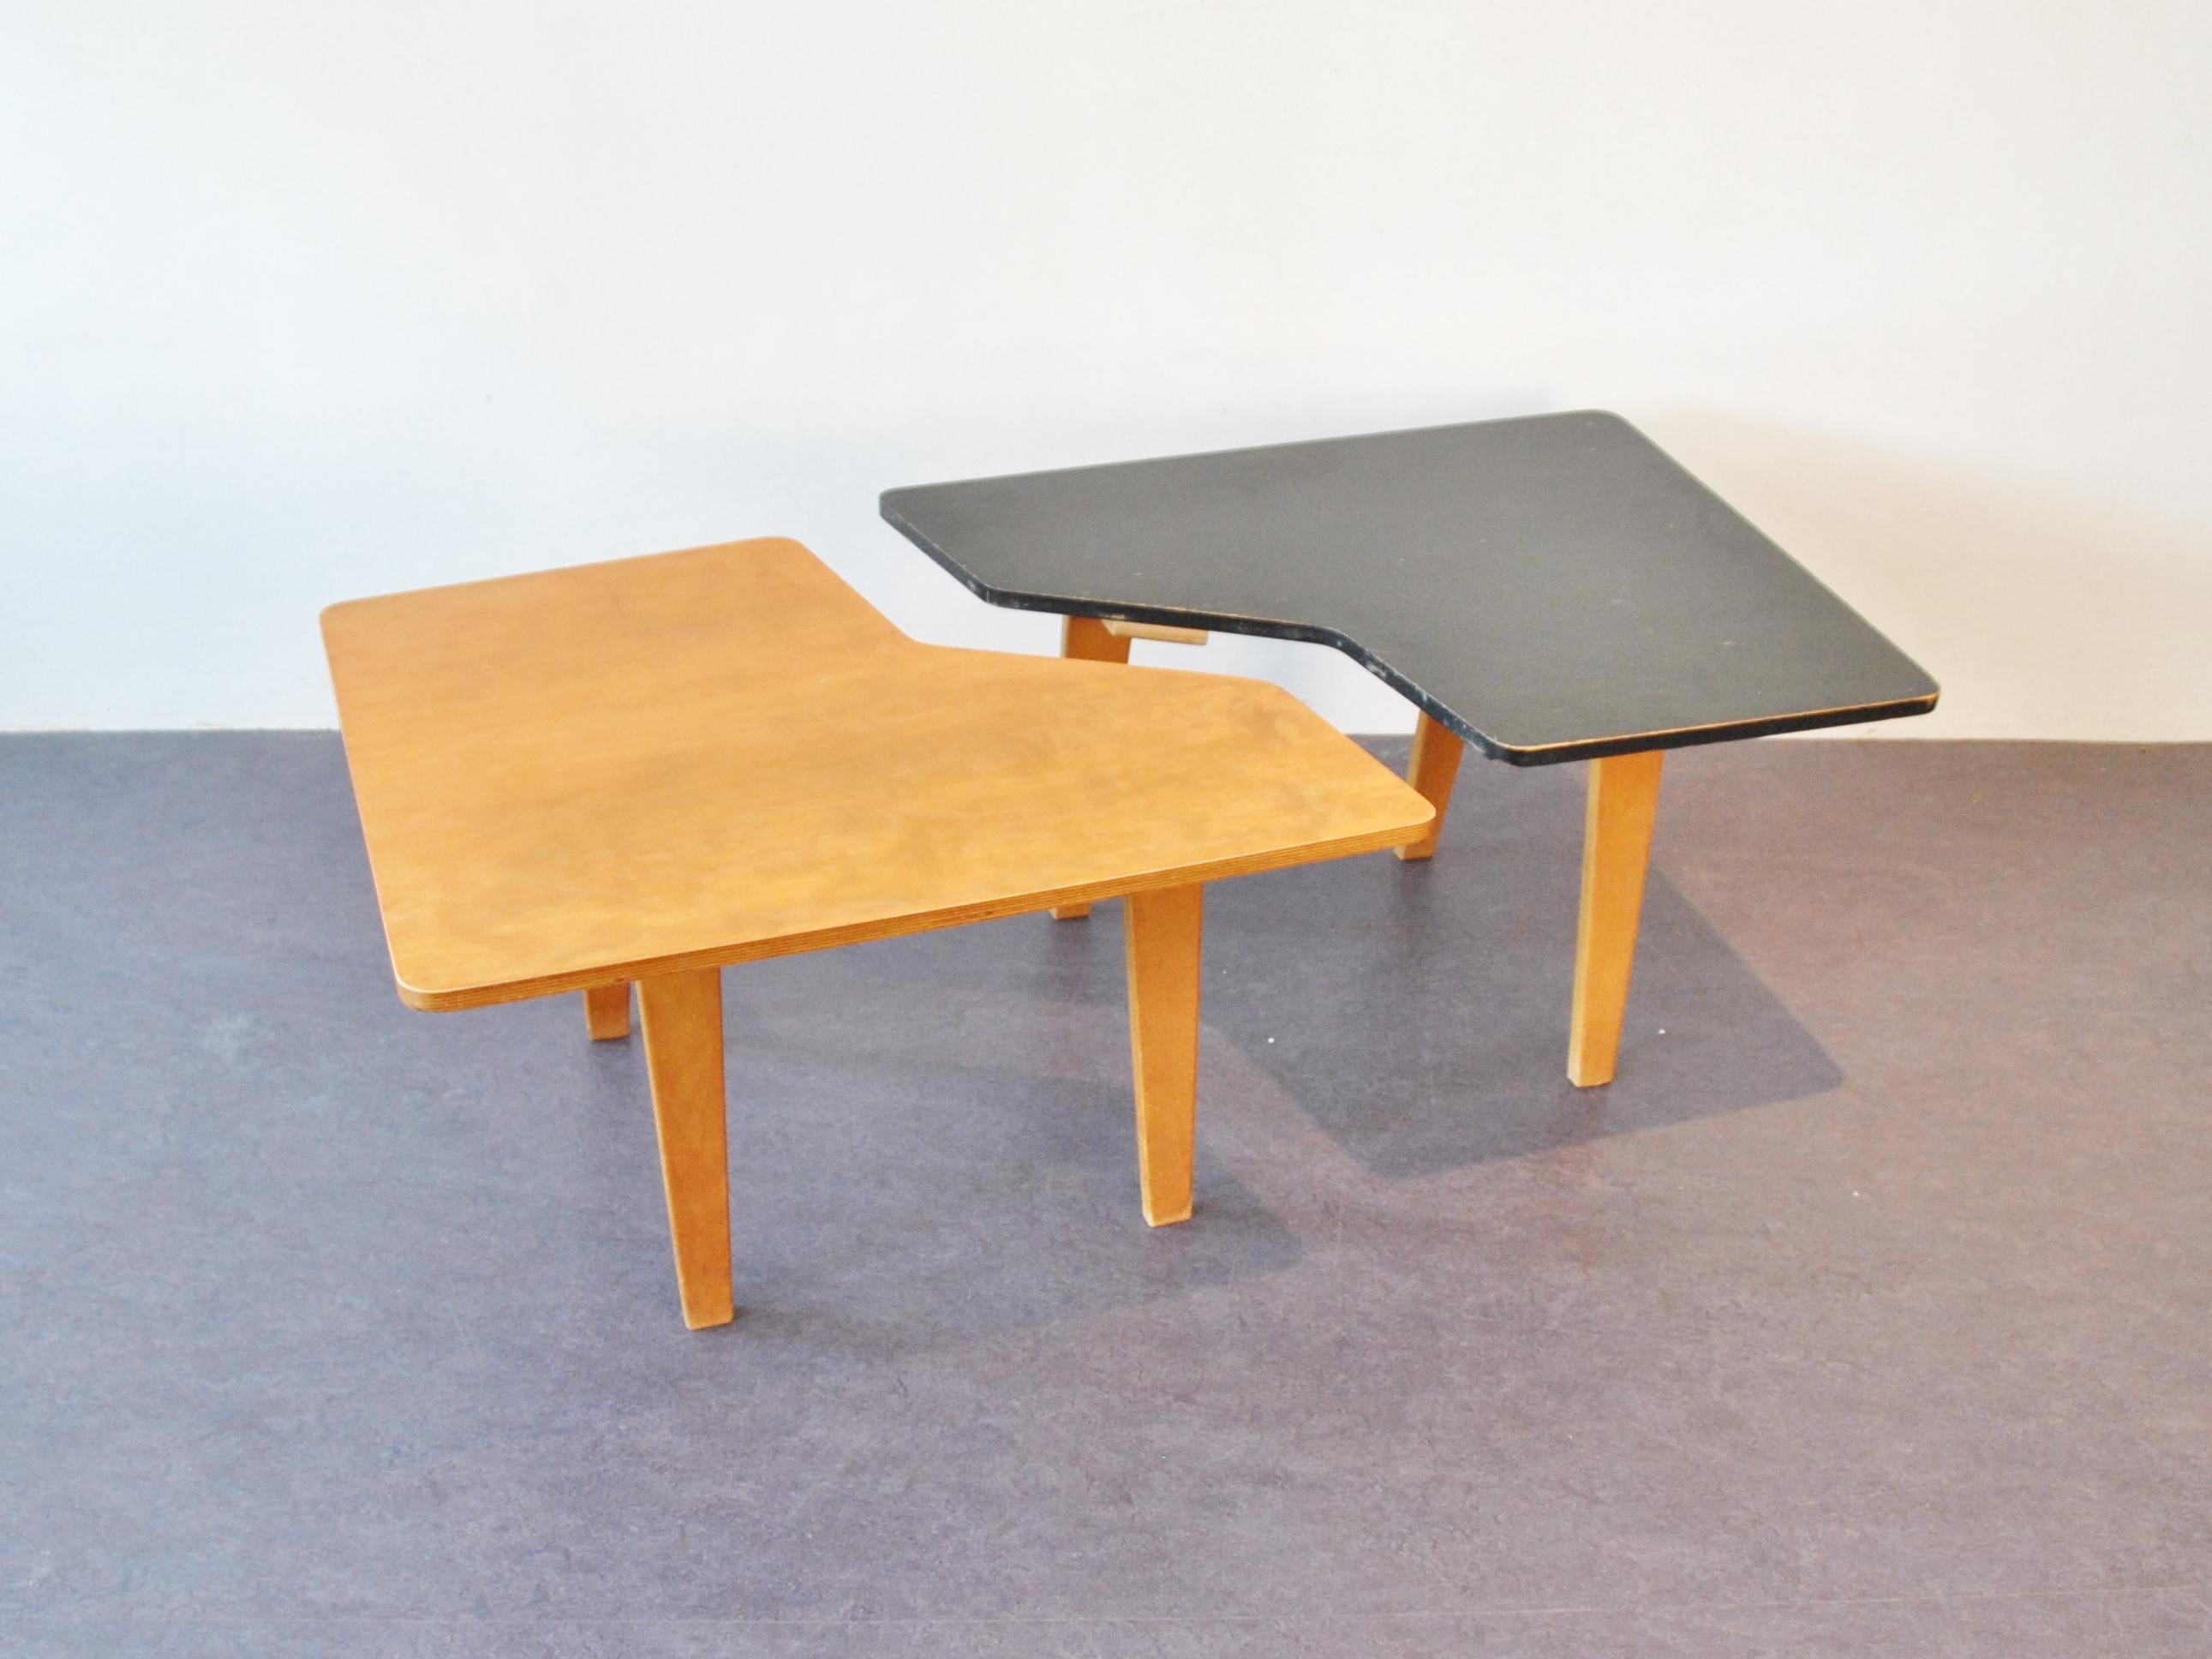 These tables are rare to come by. The set of two makes a perfect match due to the puzzle shape. The tables can be attached or used separately. The combex series is one of the earliest works by Cees Braakman. The black table is fully original, the